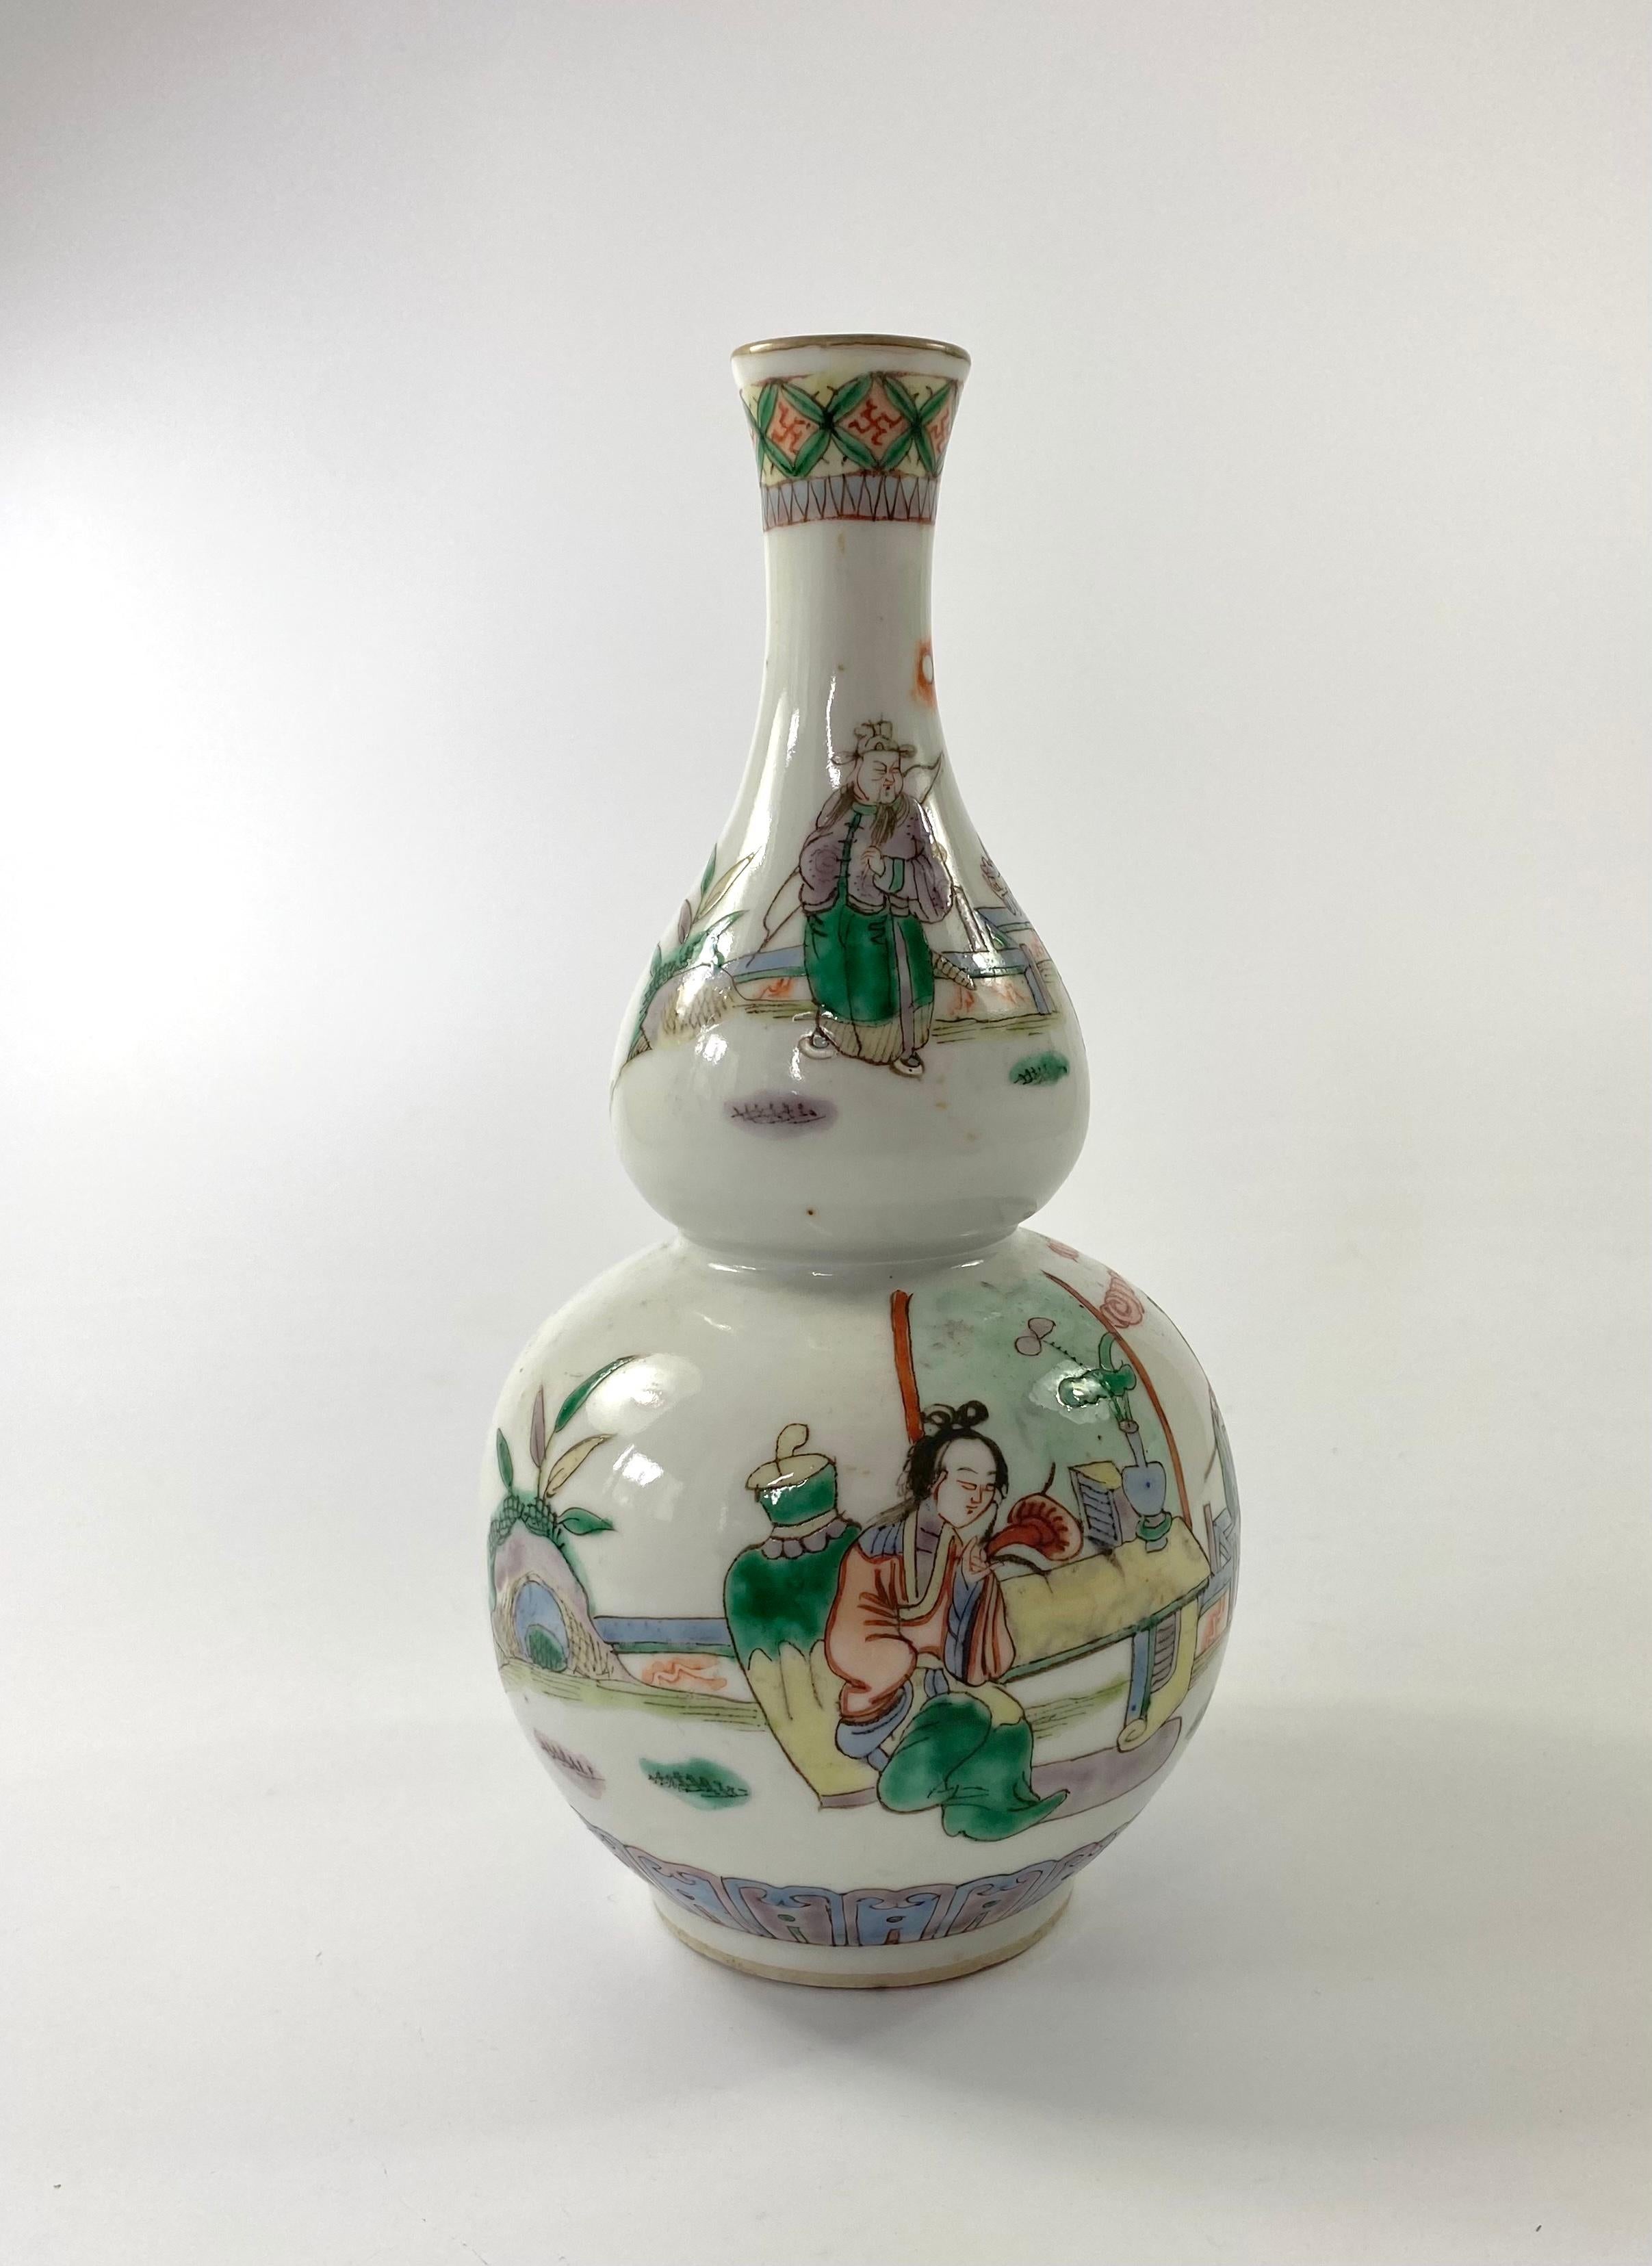 Chinese porcelain vase, bearing a retrospective four character Kangxi mark, but c. 1880, Qing Dynasty. The double gourd shaped vase, painted in famille verte or wucai enamels, with a scene of a lady gathering funghi, whilst her companion sits at a